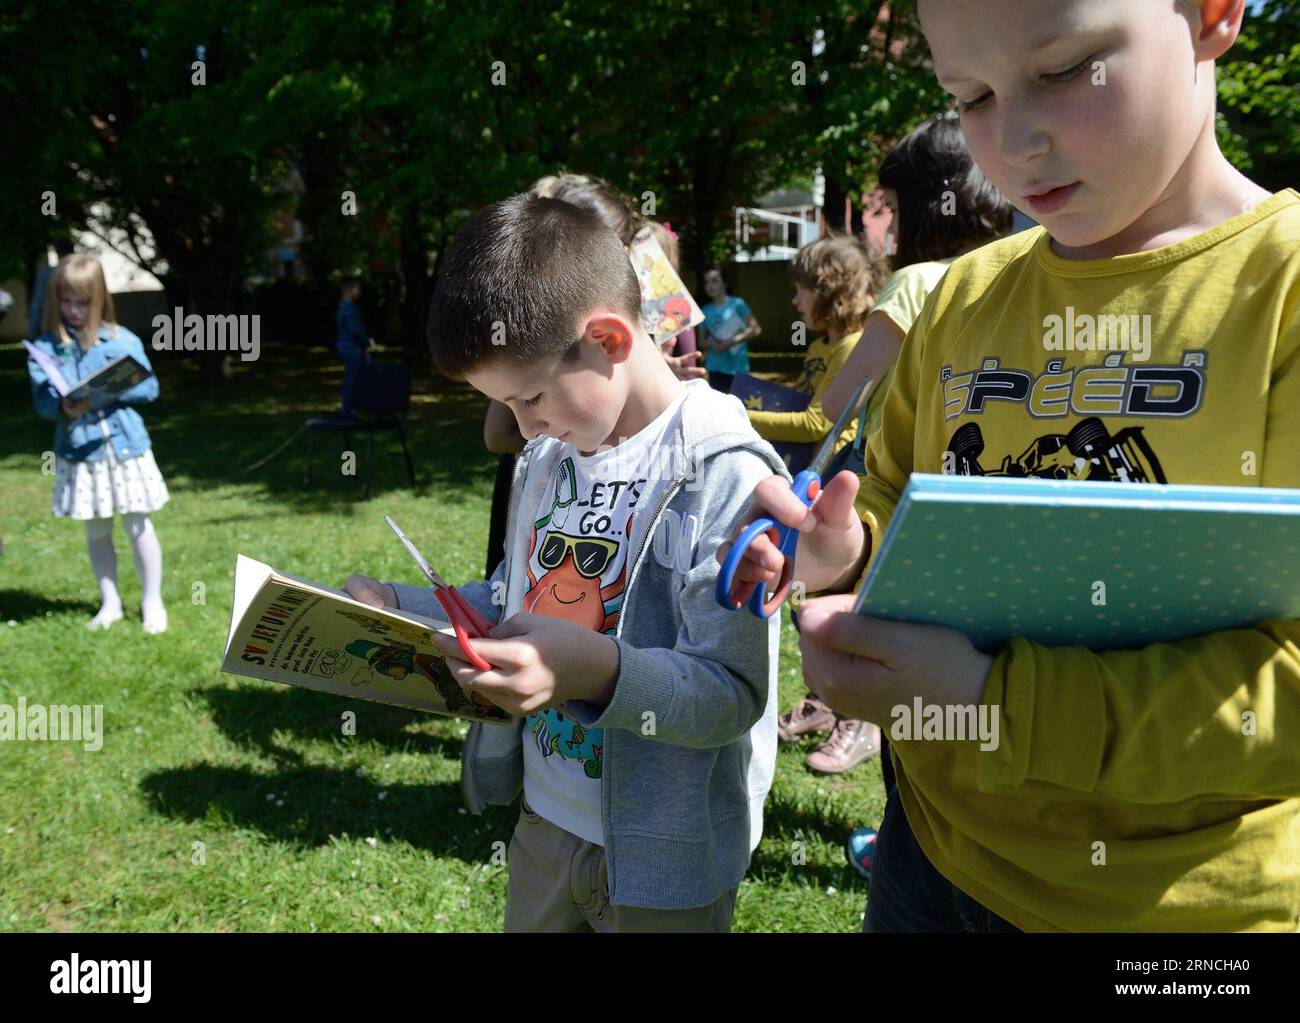 (160412) -- ZAGREB, April 12, 2016 -- Kids read books during the opening ceremony of the 9th Children s Book Festival at Tresnjevka park in Zagreb, capital of Croatia, April 12, 2016. Pick a Story event is organized to promote reading habit among preschool-aged children. ) CROATIA-ZAGREB-CHILDREN S BOOK FESTIVAL MisoxLisanin PUBLICATIONxNOTxINxCHN   160412 Zagreb April 12 2016 Kids Read Books during The Opening Ceremony of The 9th Children S Book Festival AT Tresnjevka Park in Zagreb Capital of Croatia April 12 2016 Pick a Story Event IS Organized to promote Reading Habit among Preschool Aged Banque D'Images